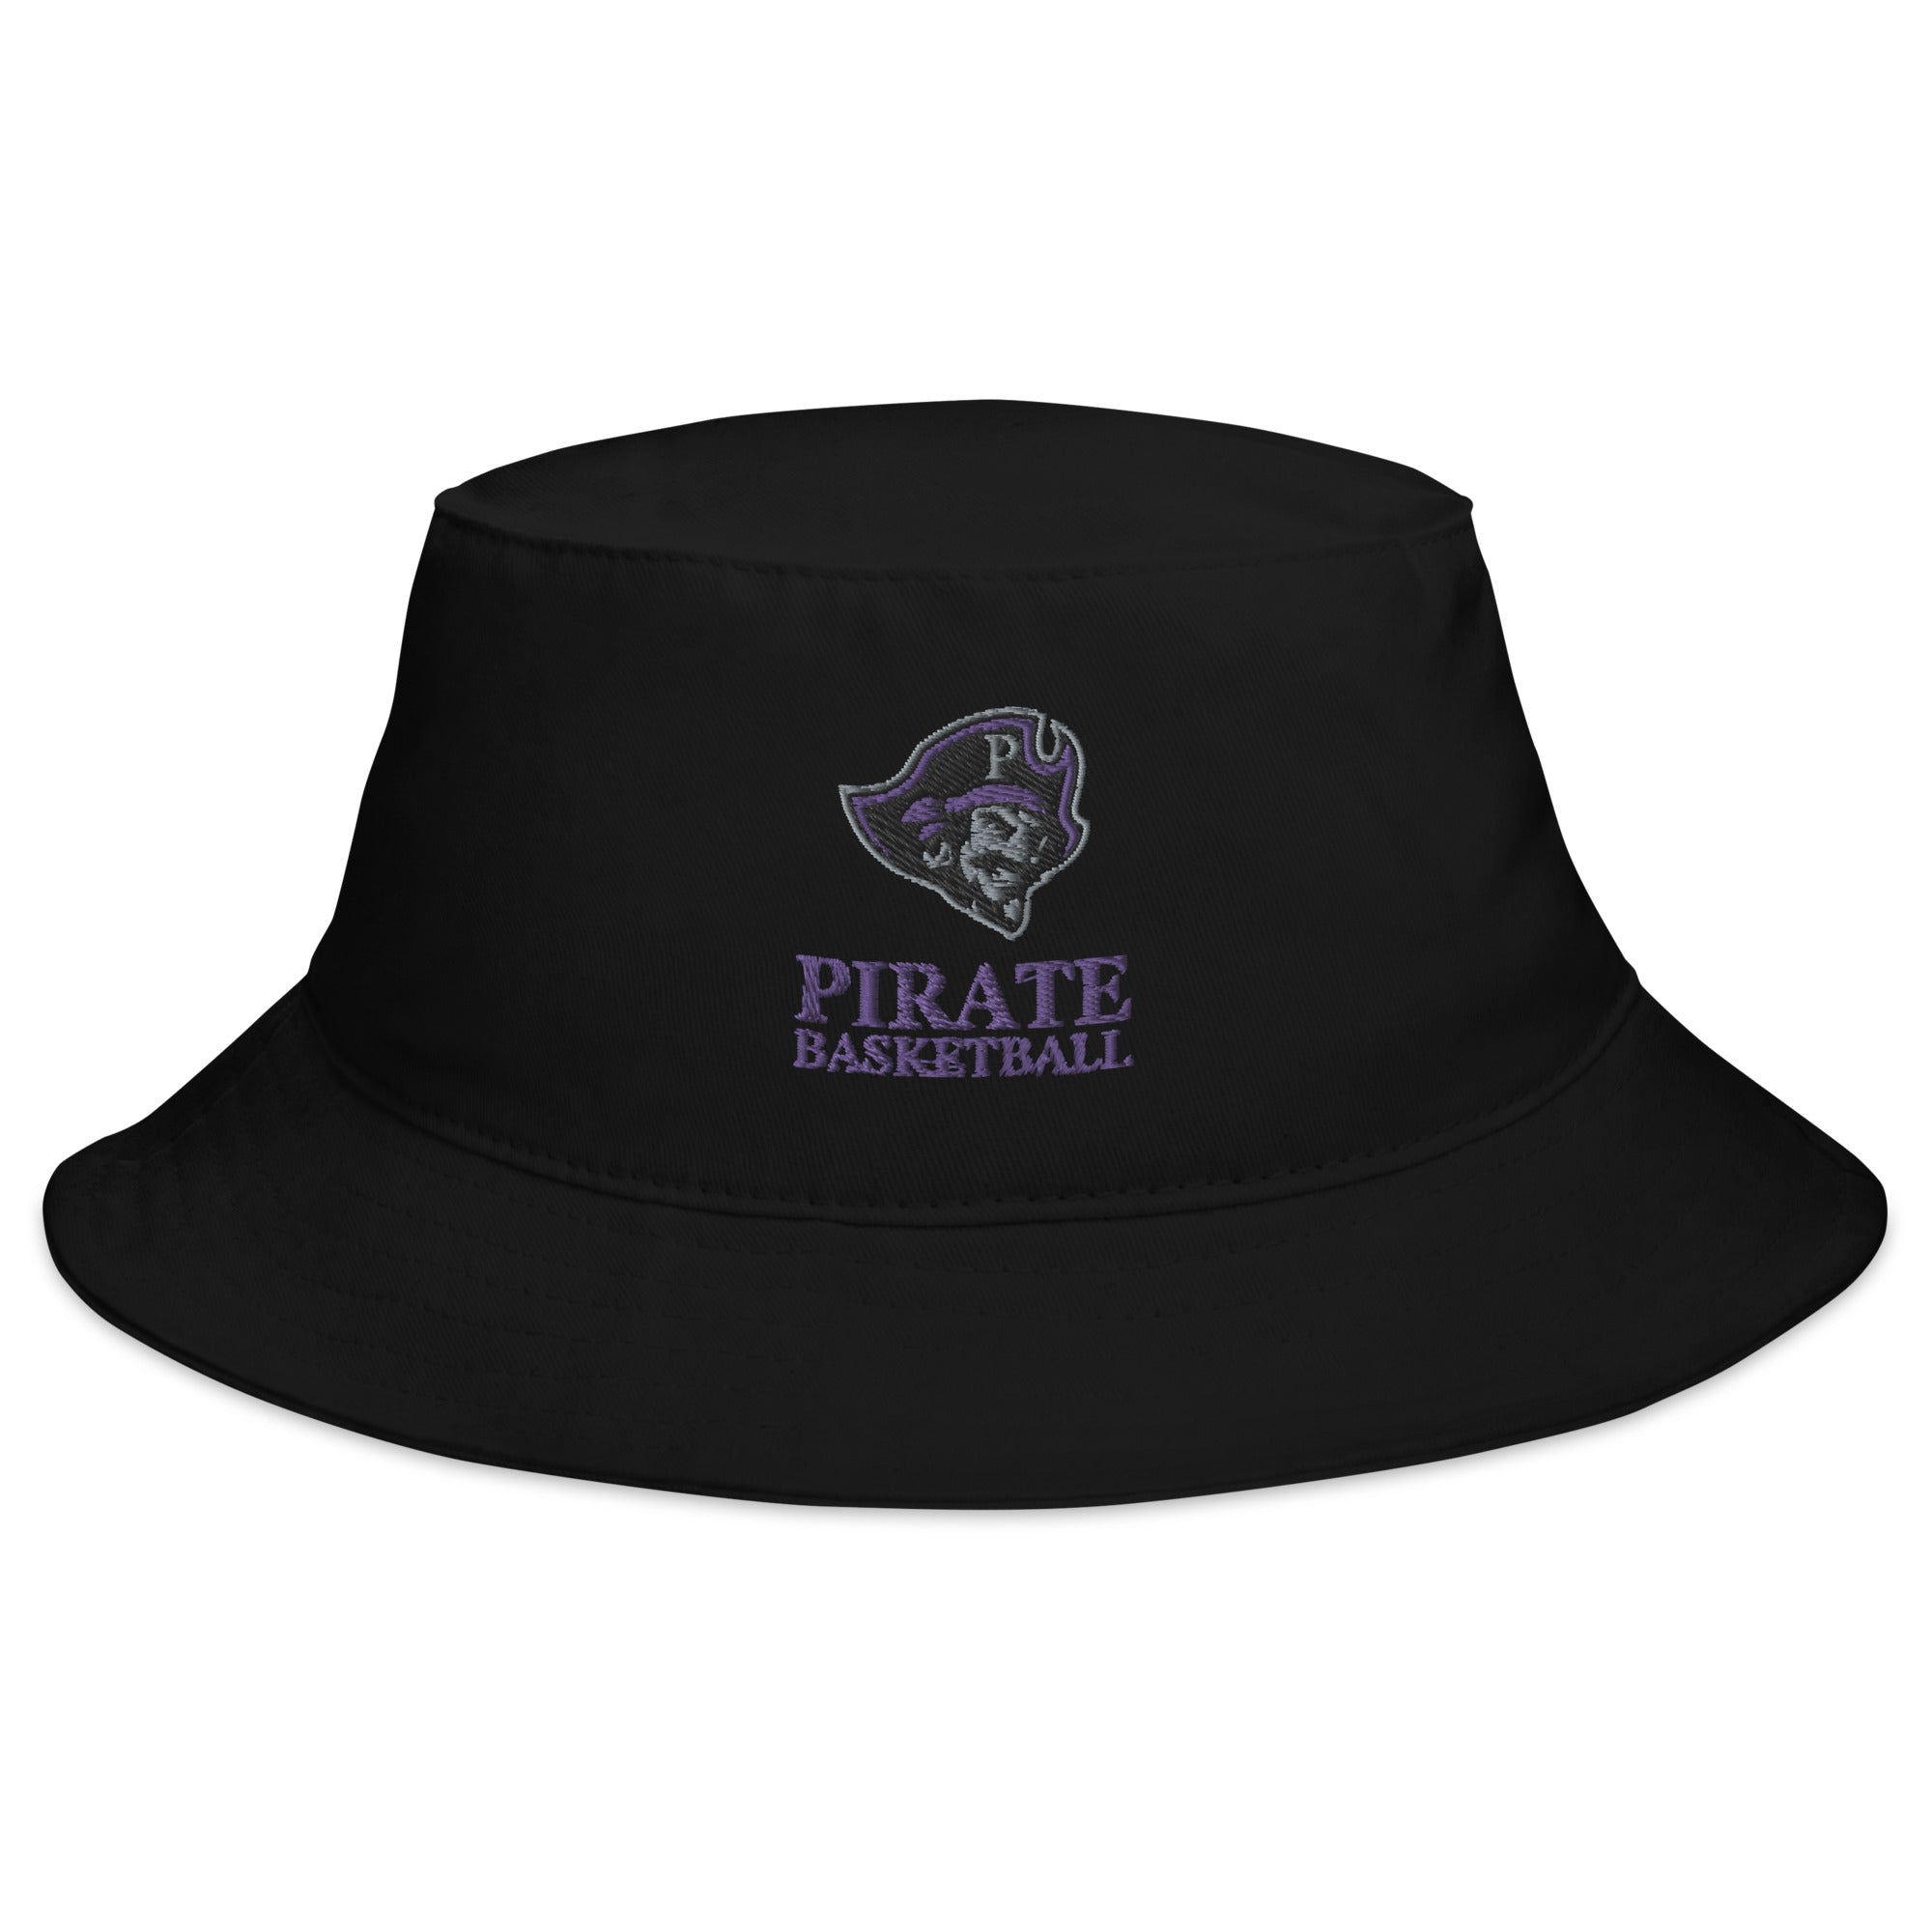 Piper Middle School Basketball Bucket Hat